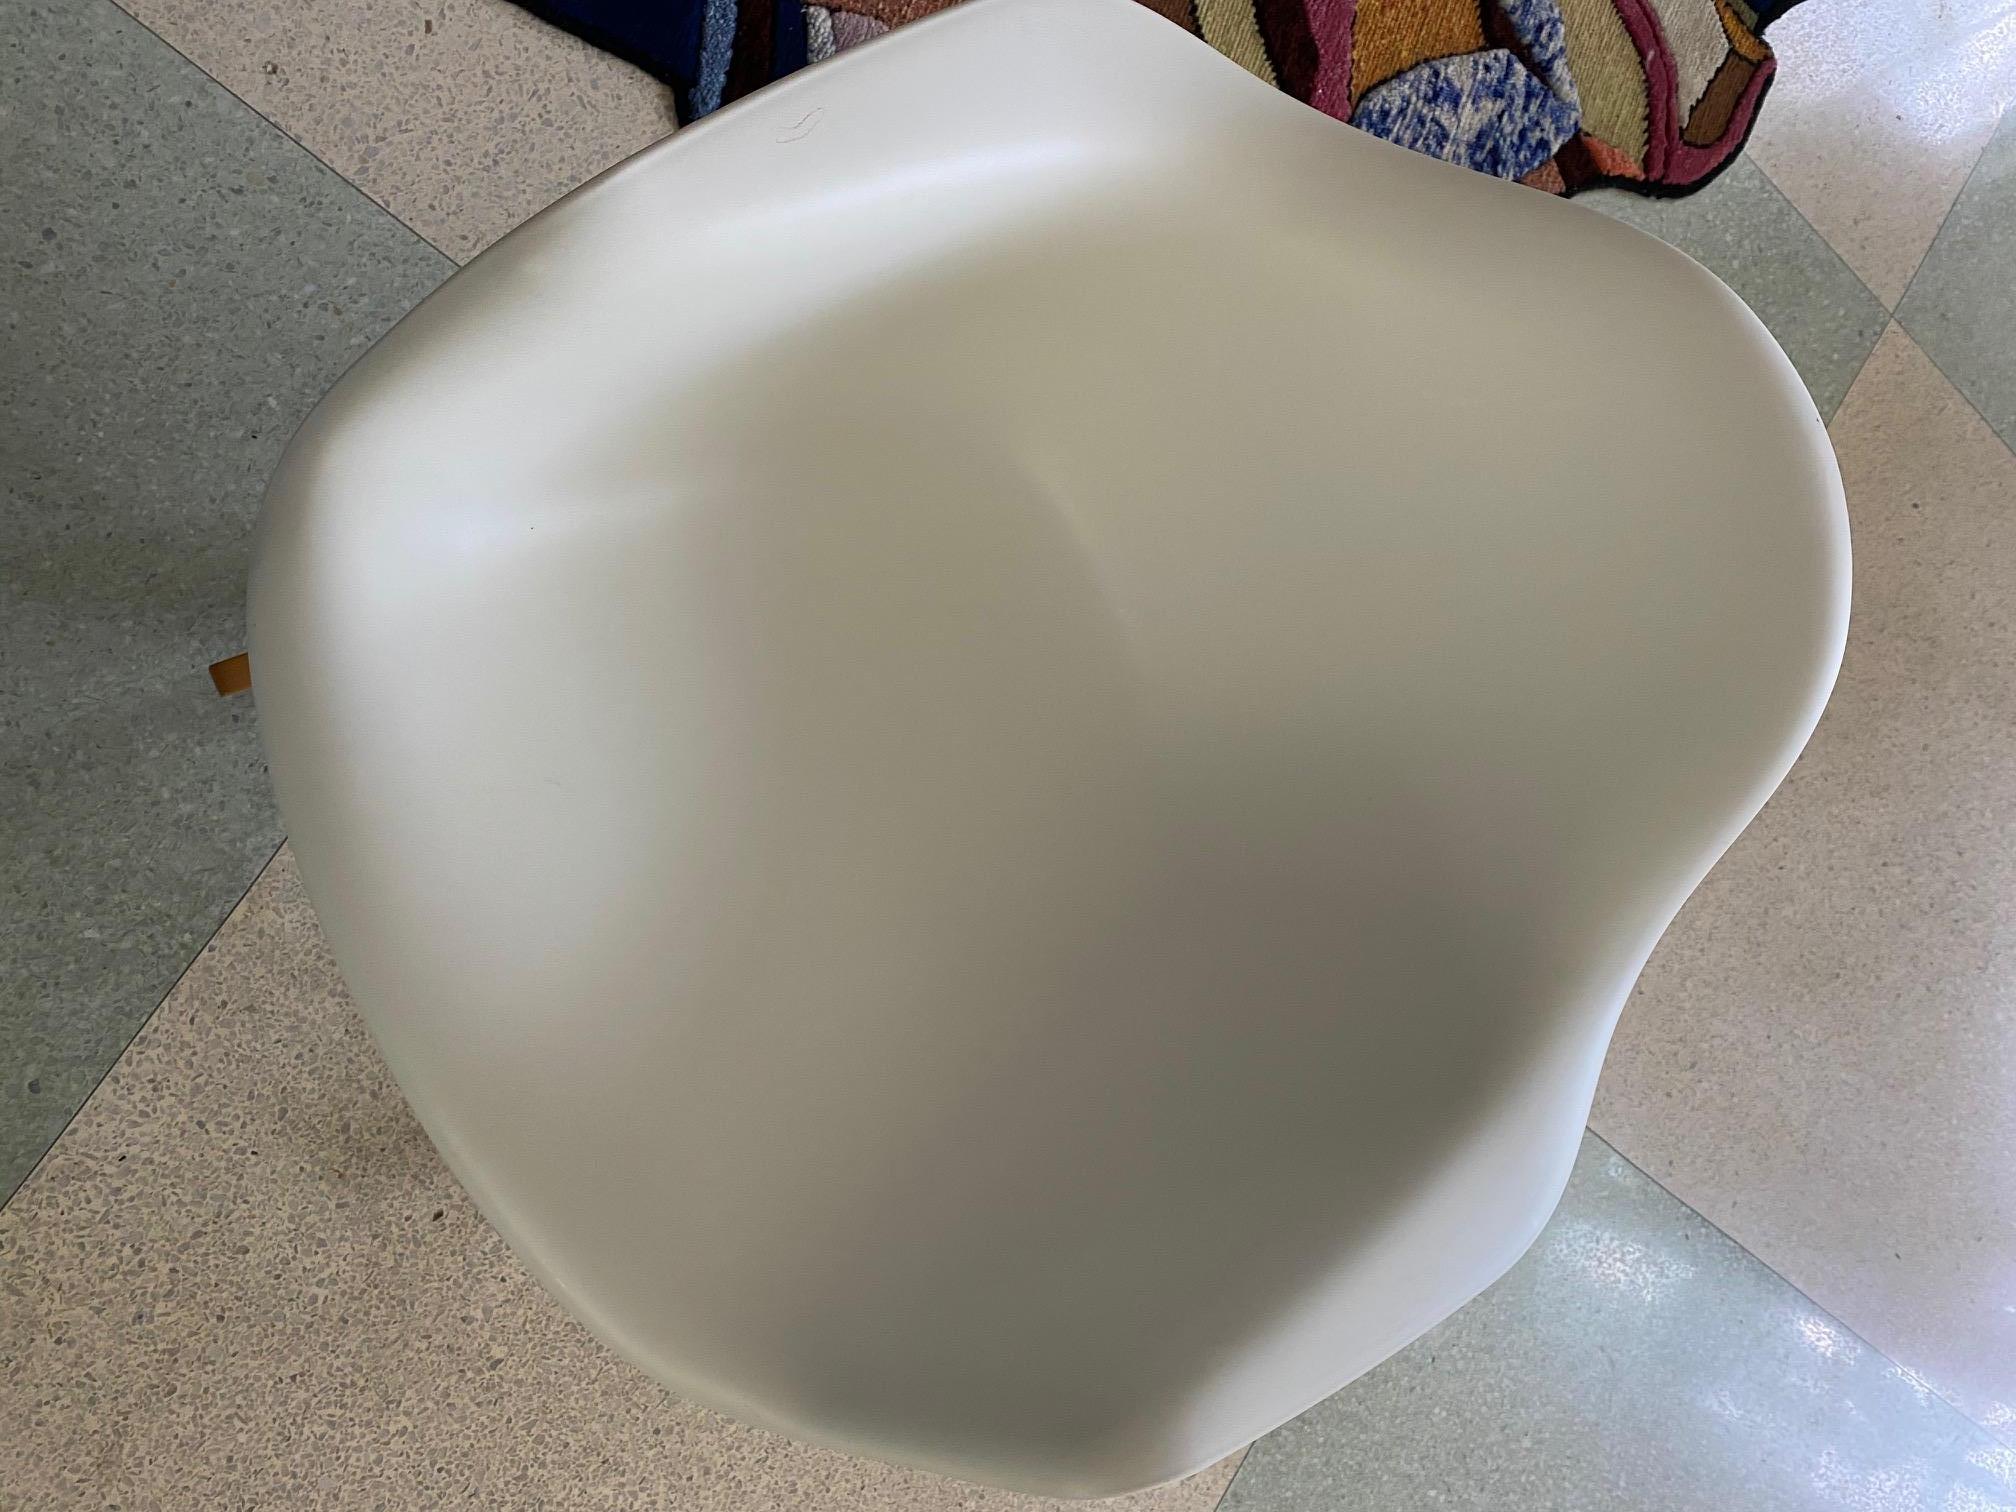 Plastic Eames Molded Armchair, Rocker Base designed by Charles and Ray Eames